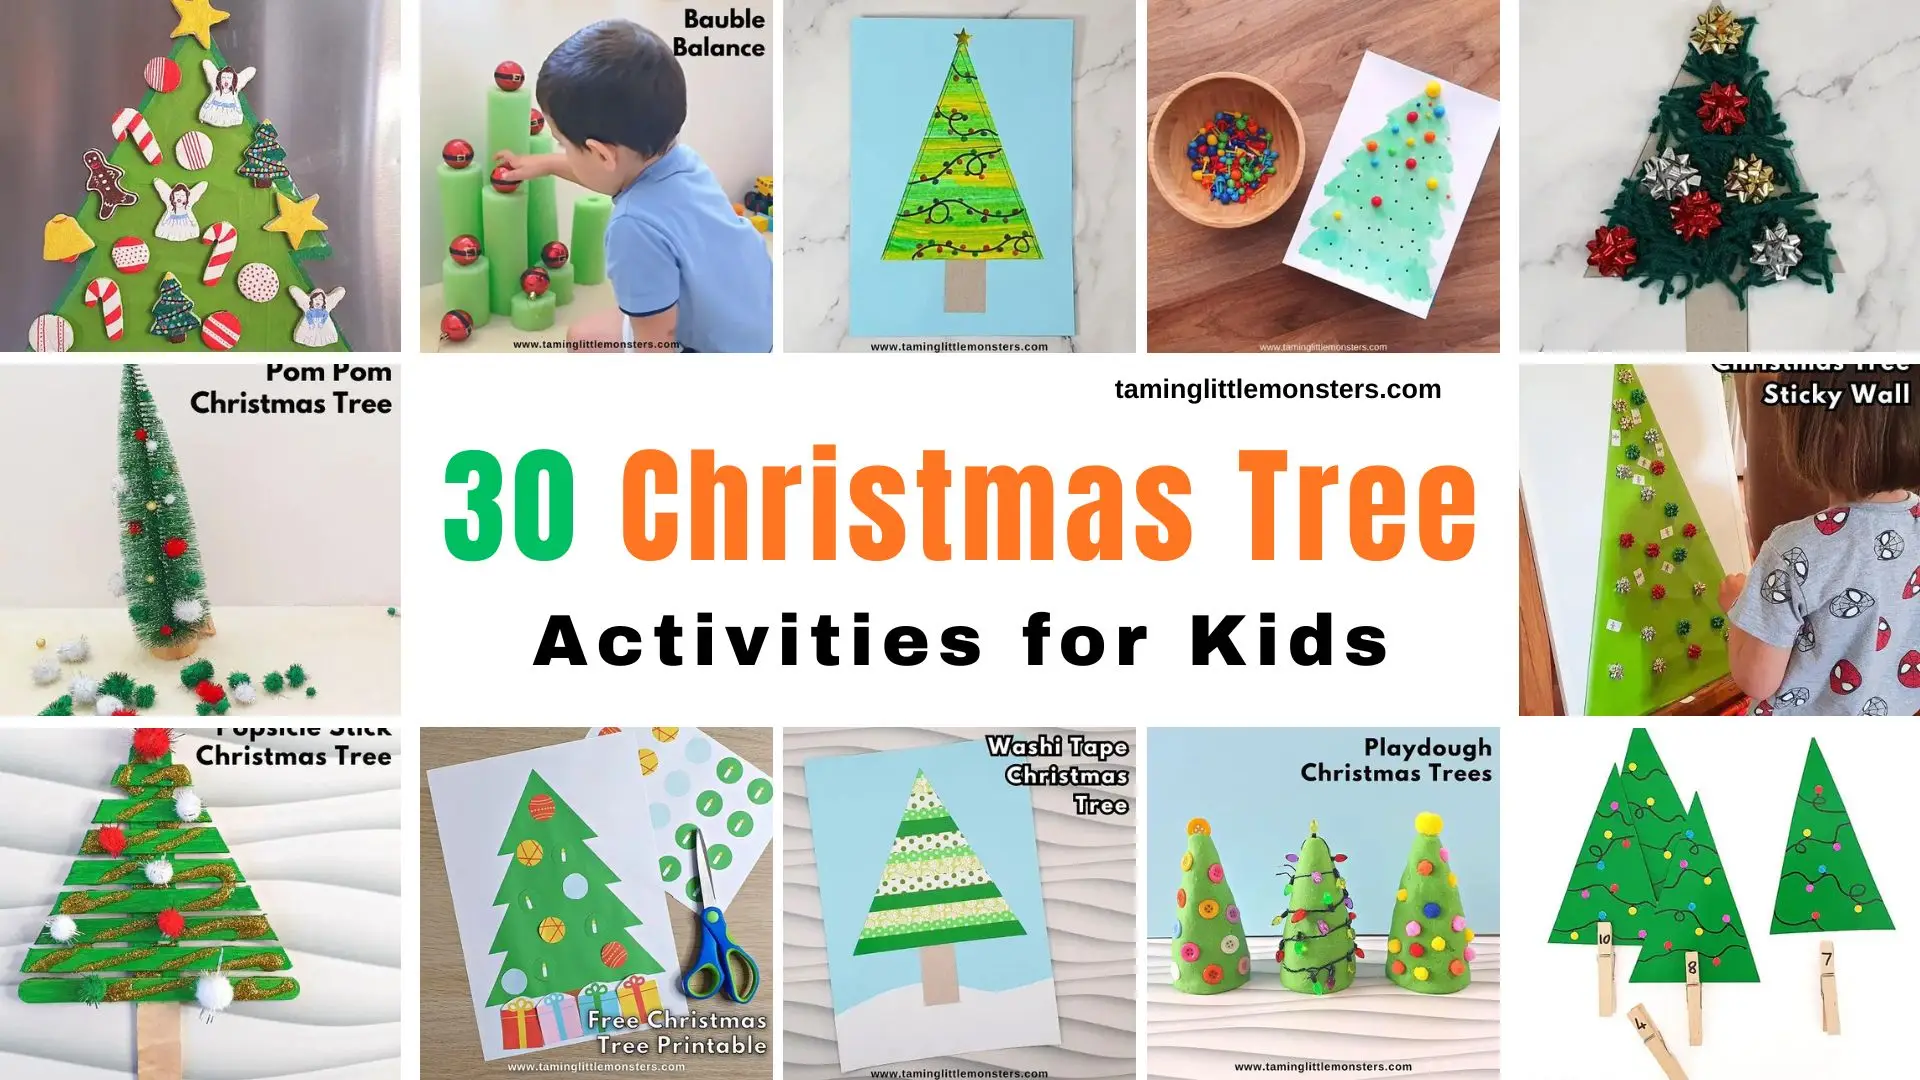 Washi Tape Christmas Tree Craft for Kids - Taming Little Monsters